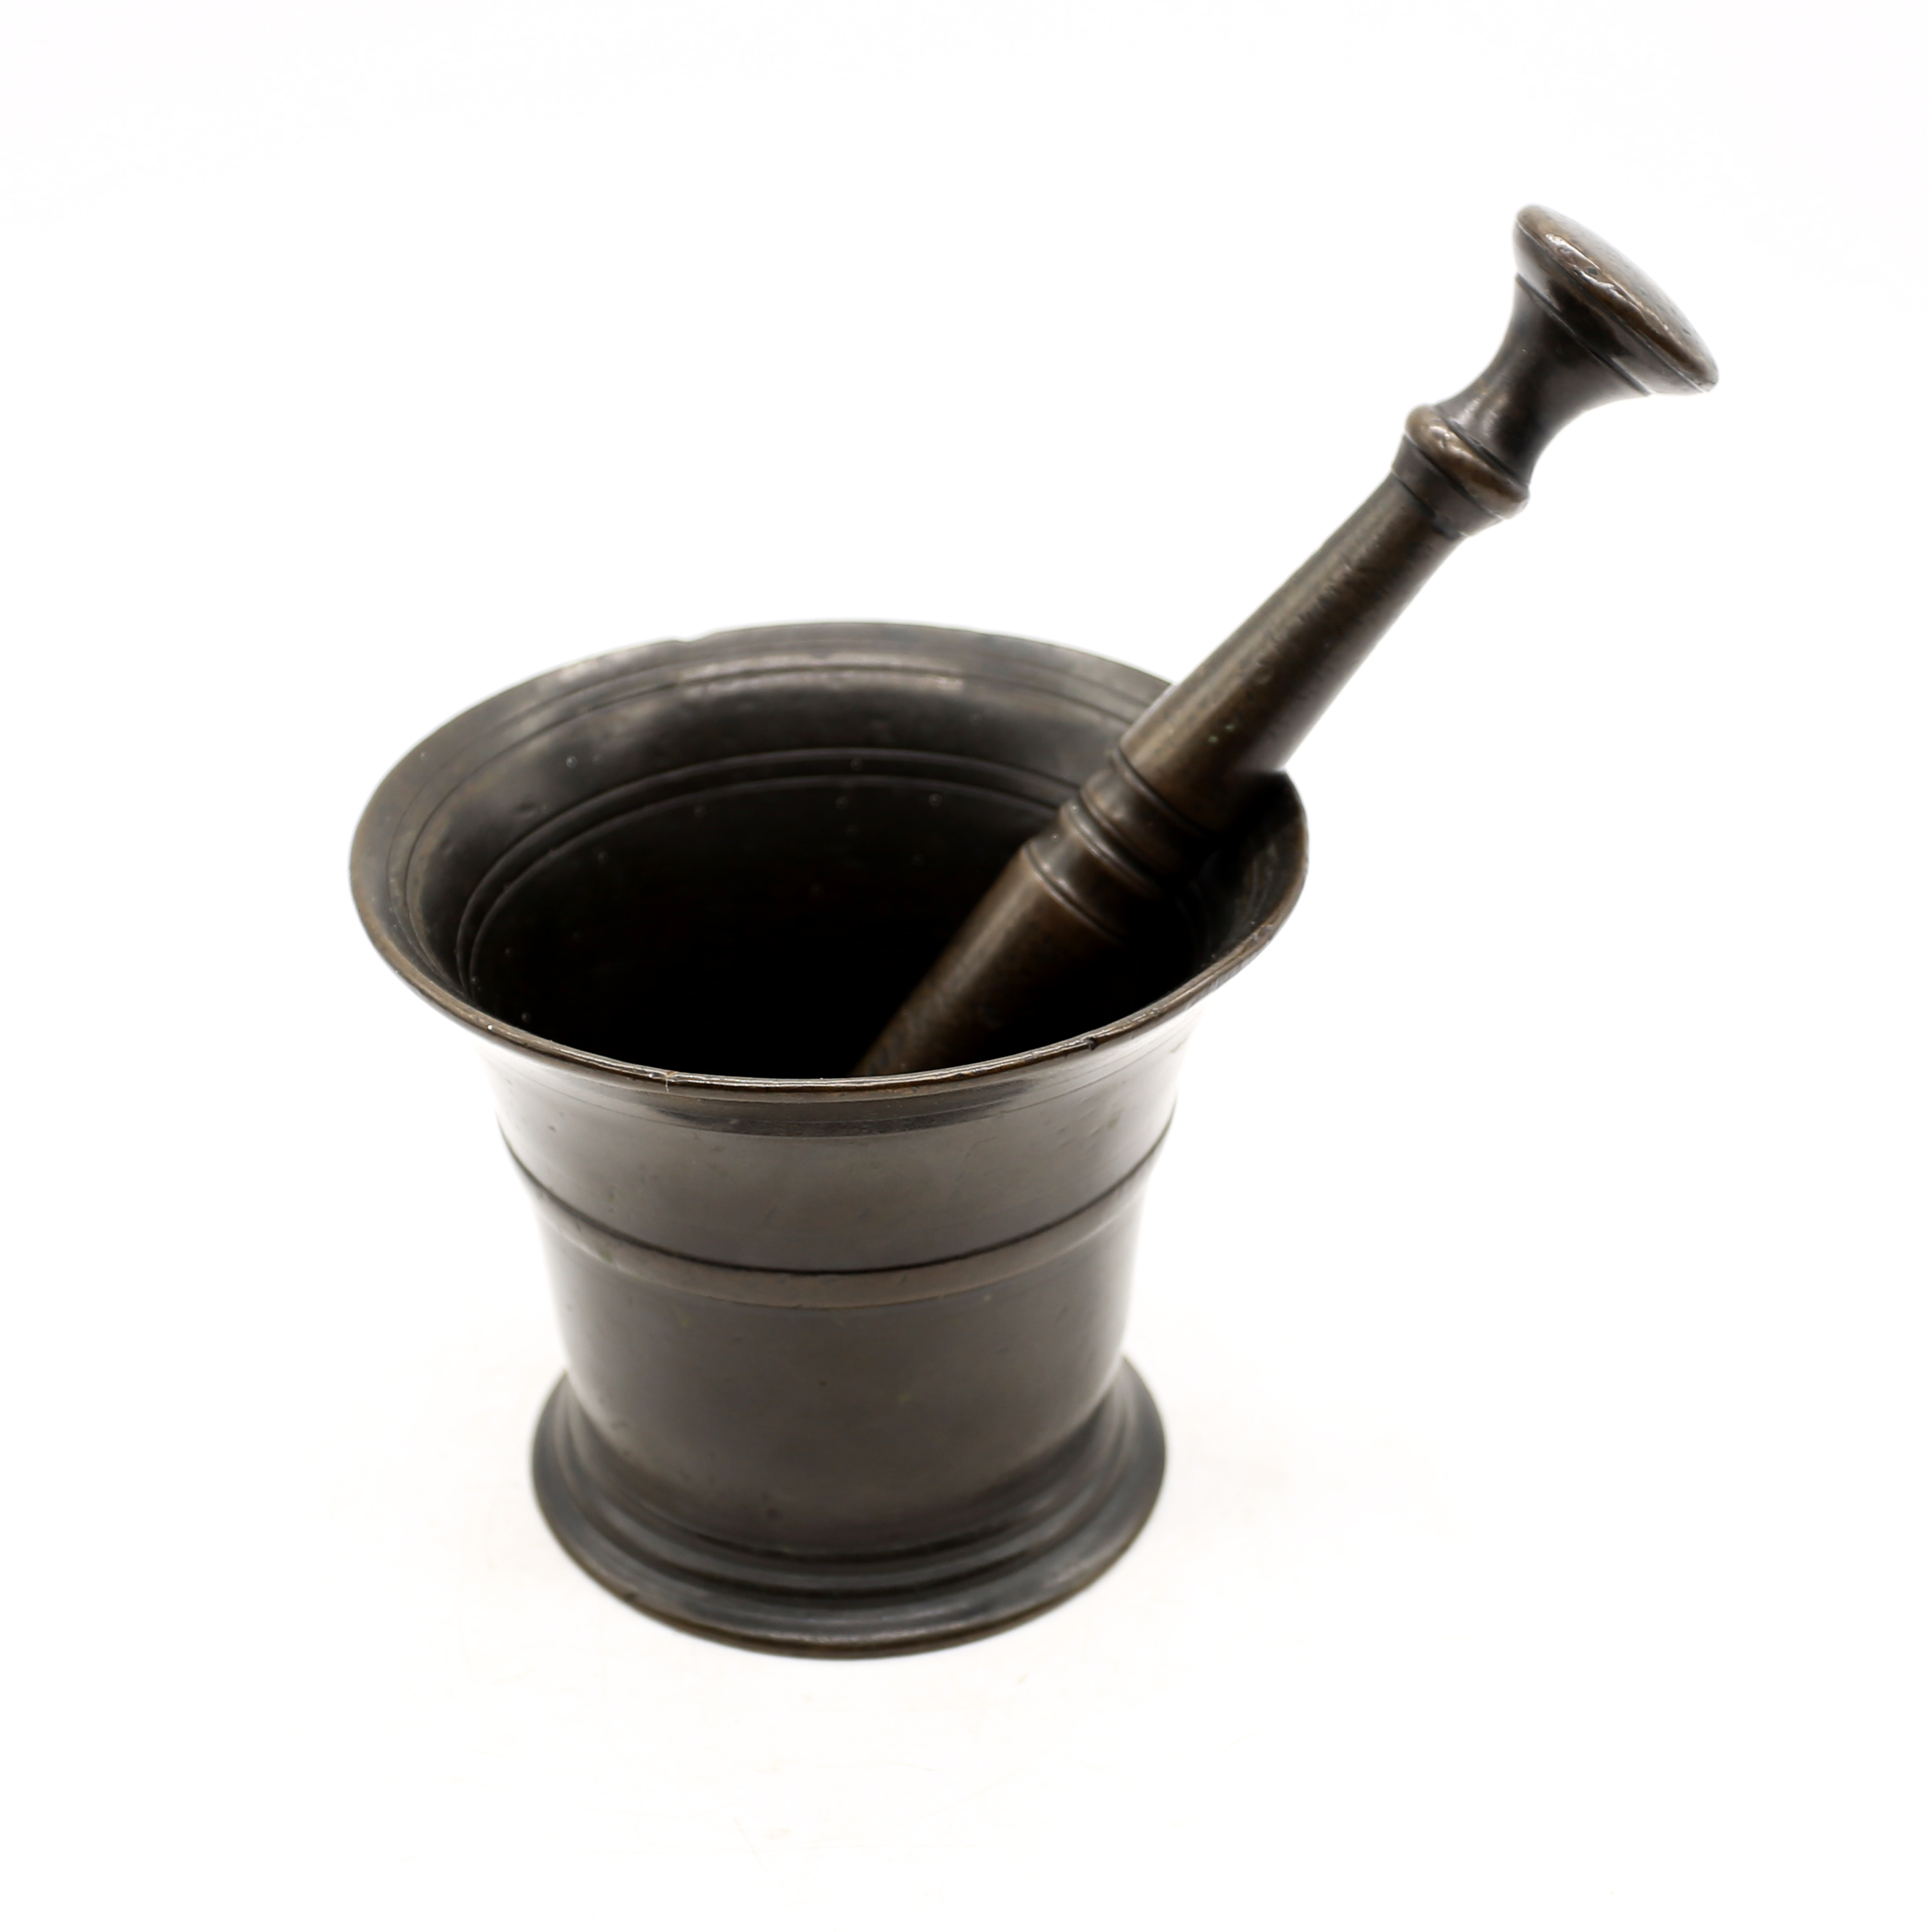 A late 17th century bronze pestle and mortar: mortar approximately 11cm high, pestle approximately